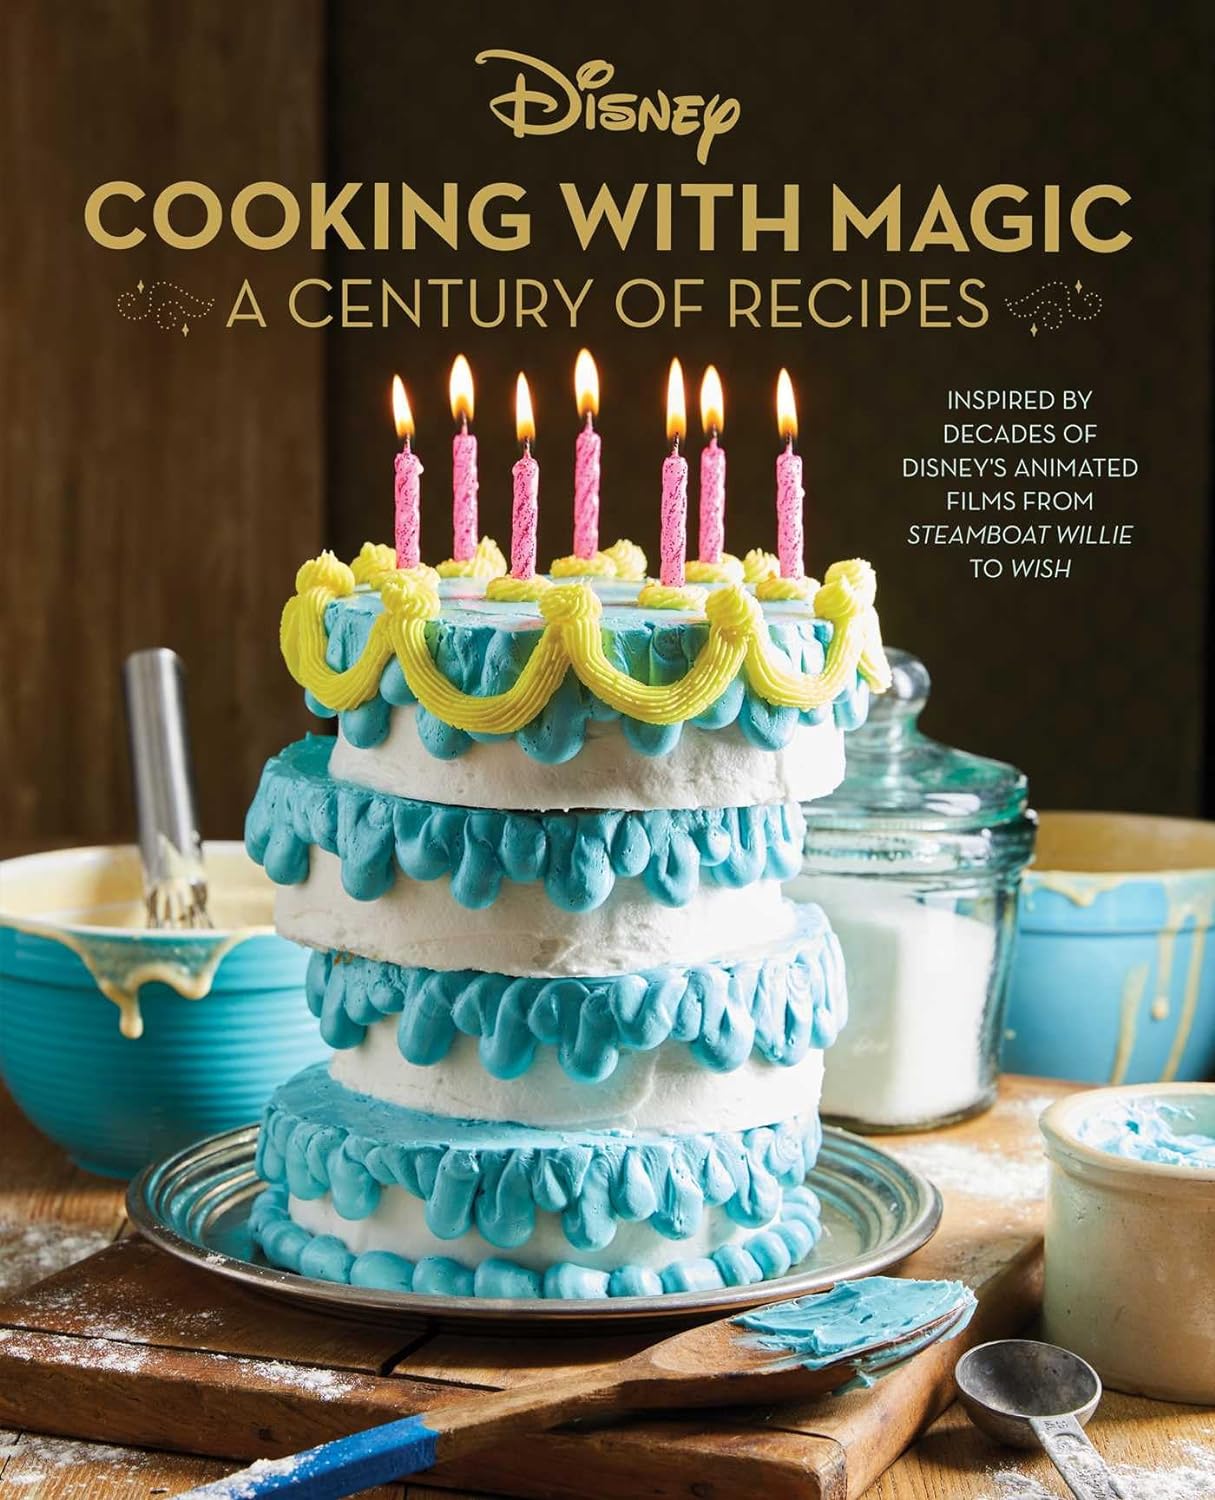 A brown cookbook cover with the Disney logo and the text: "COOKING WITH MAGIC: A CENTURY OF RECIPES" and "Inspired by decades of Disney's animated films from STEAMBOAT WILLIE to WISH". There is a blue, yellow, and white cake on the front with pink candles, surrounded by various baking tools.  